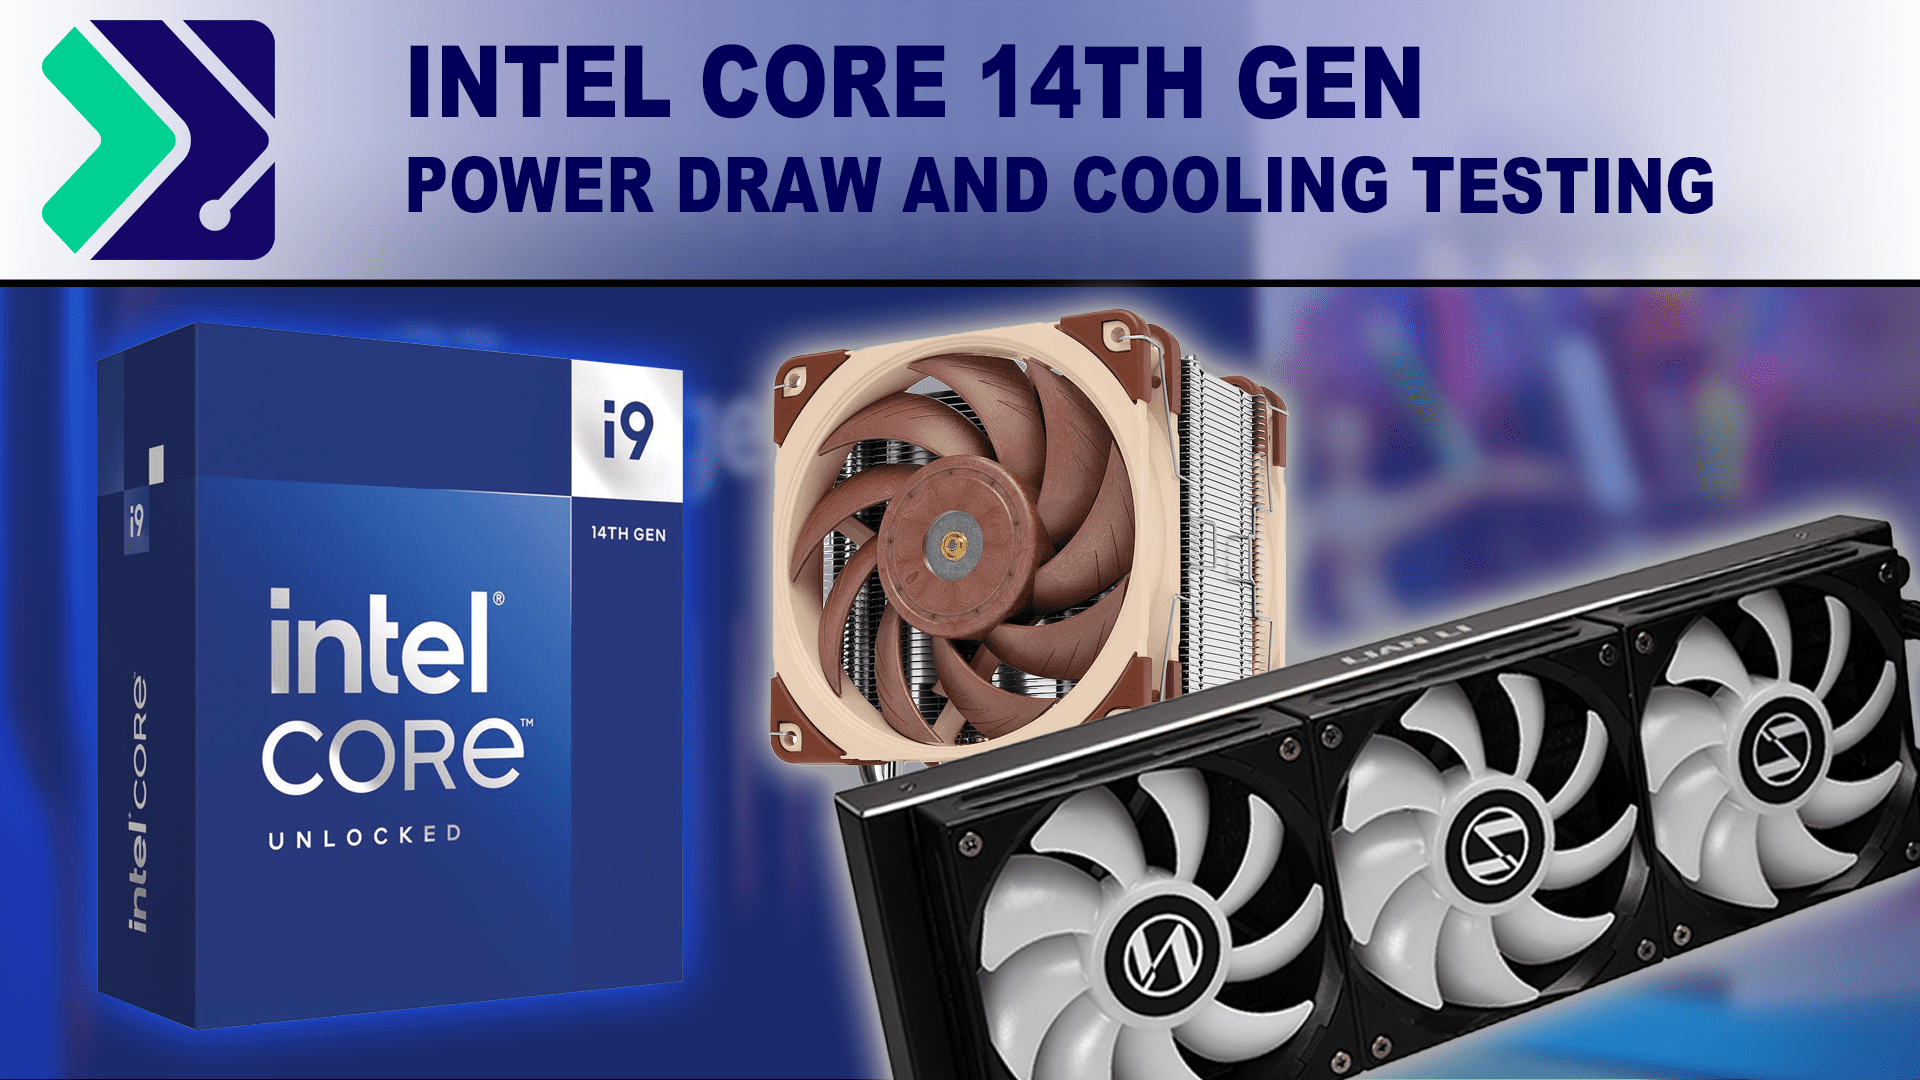 Power Draw and Cooling: Intel Core 14th Gen Processors